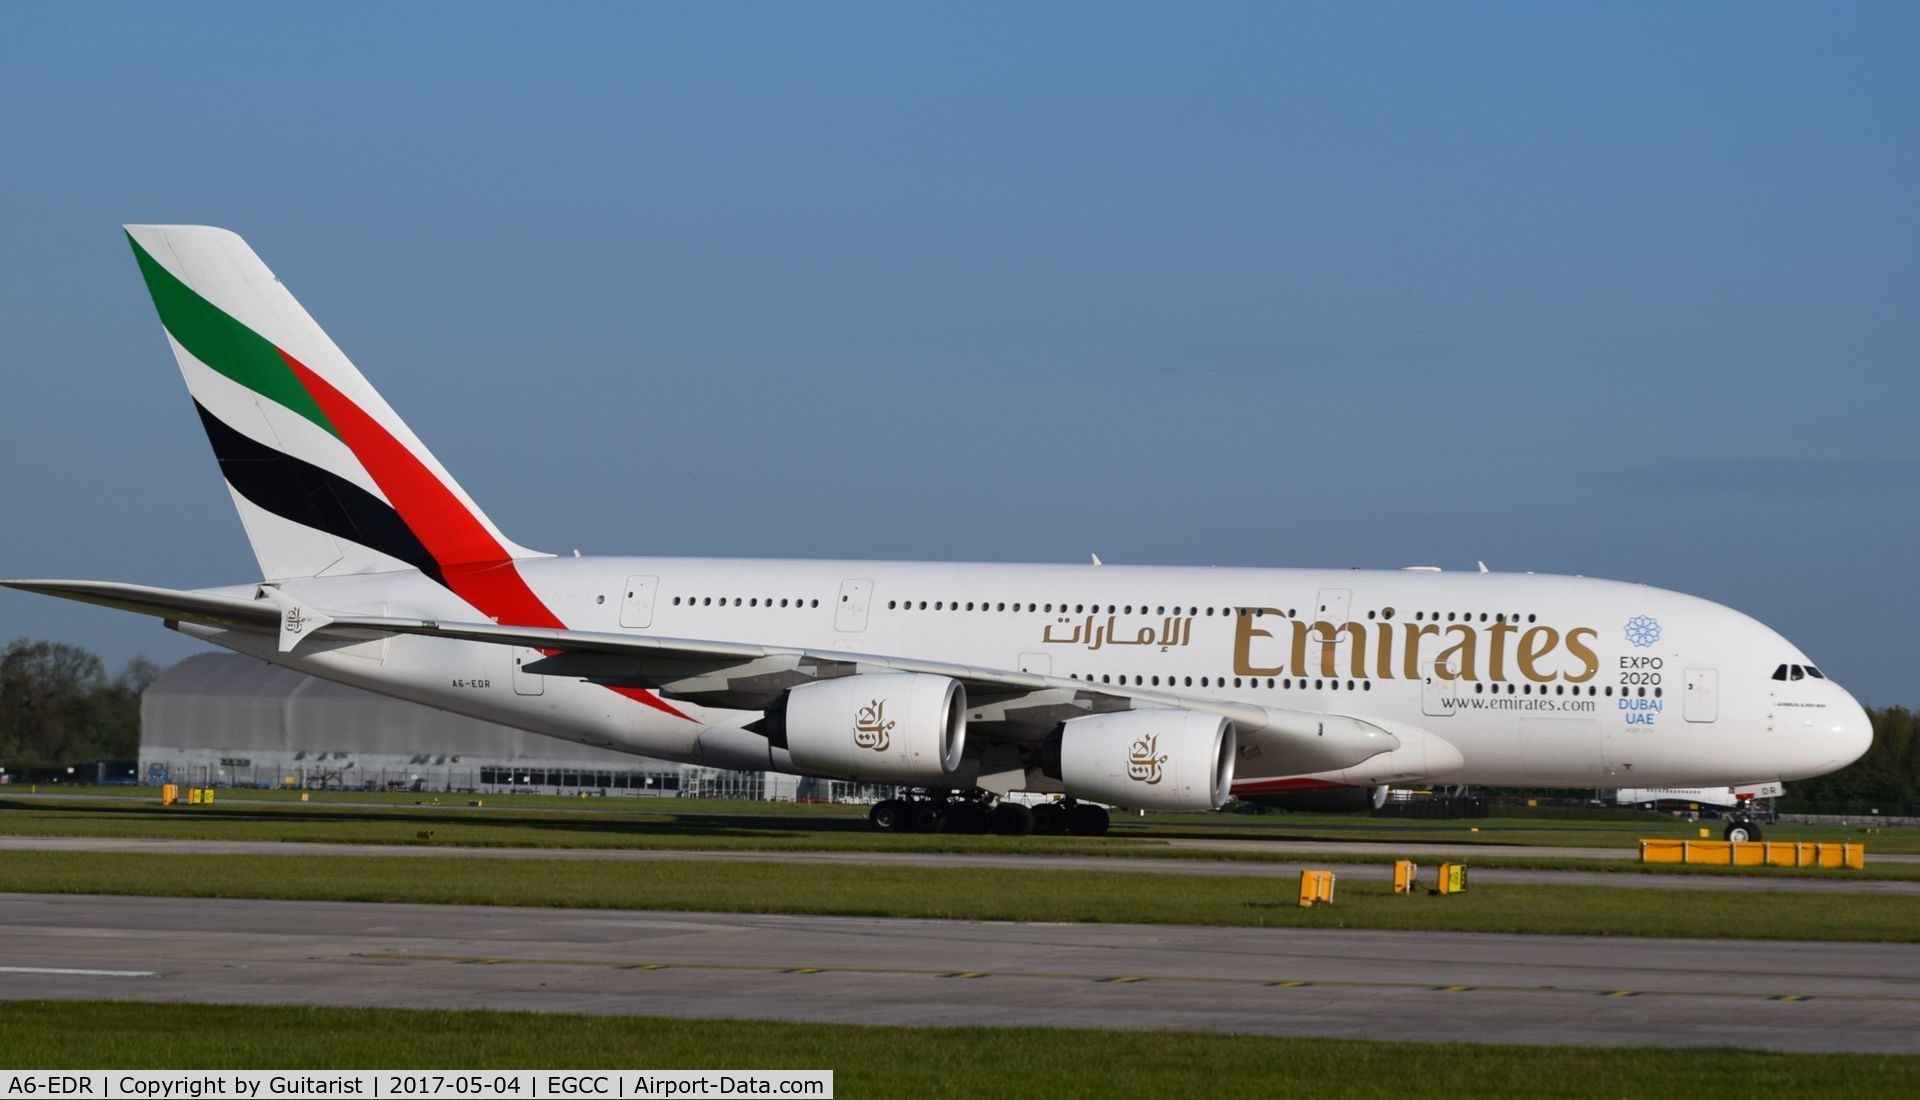 A6-EDR, 2011 Airbus A380-861 C/N 083, At Manchester